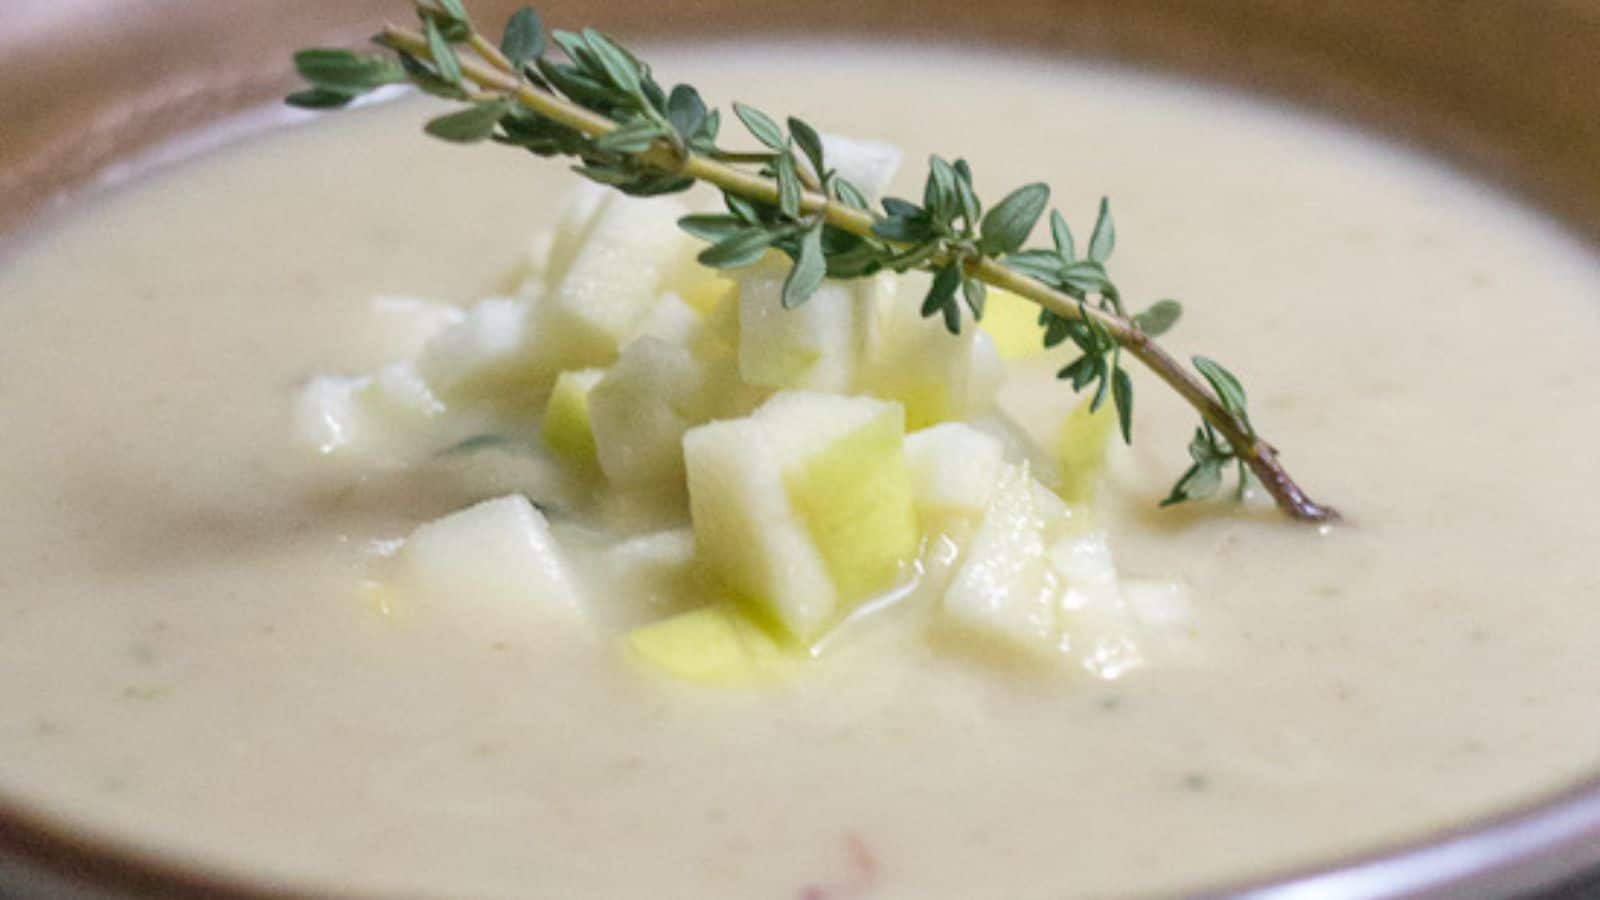 A bowl of soup with apples and sprigs of thyme.